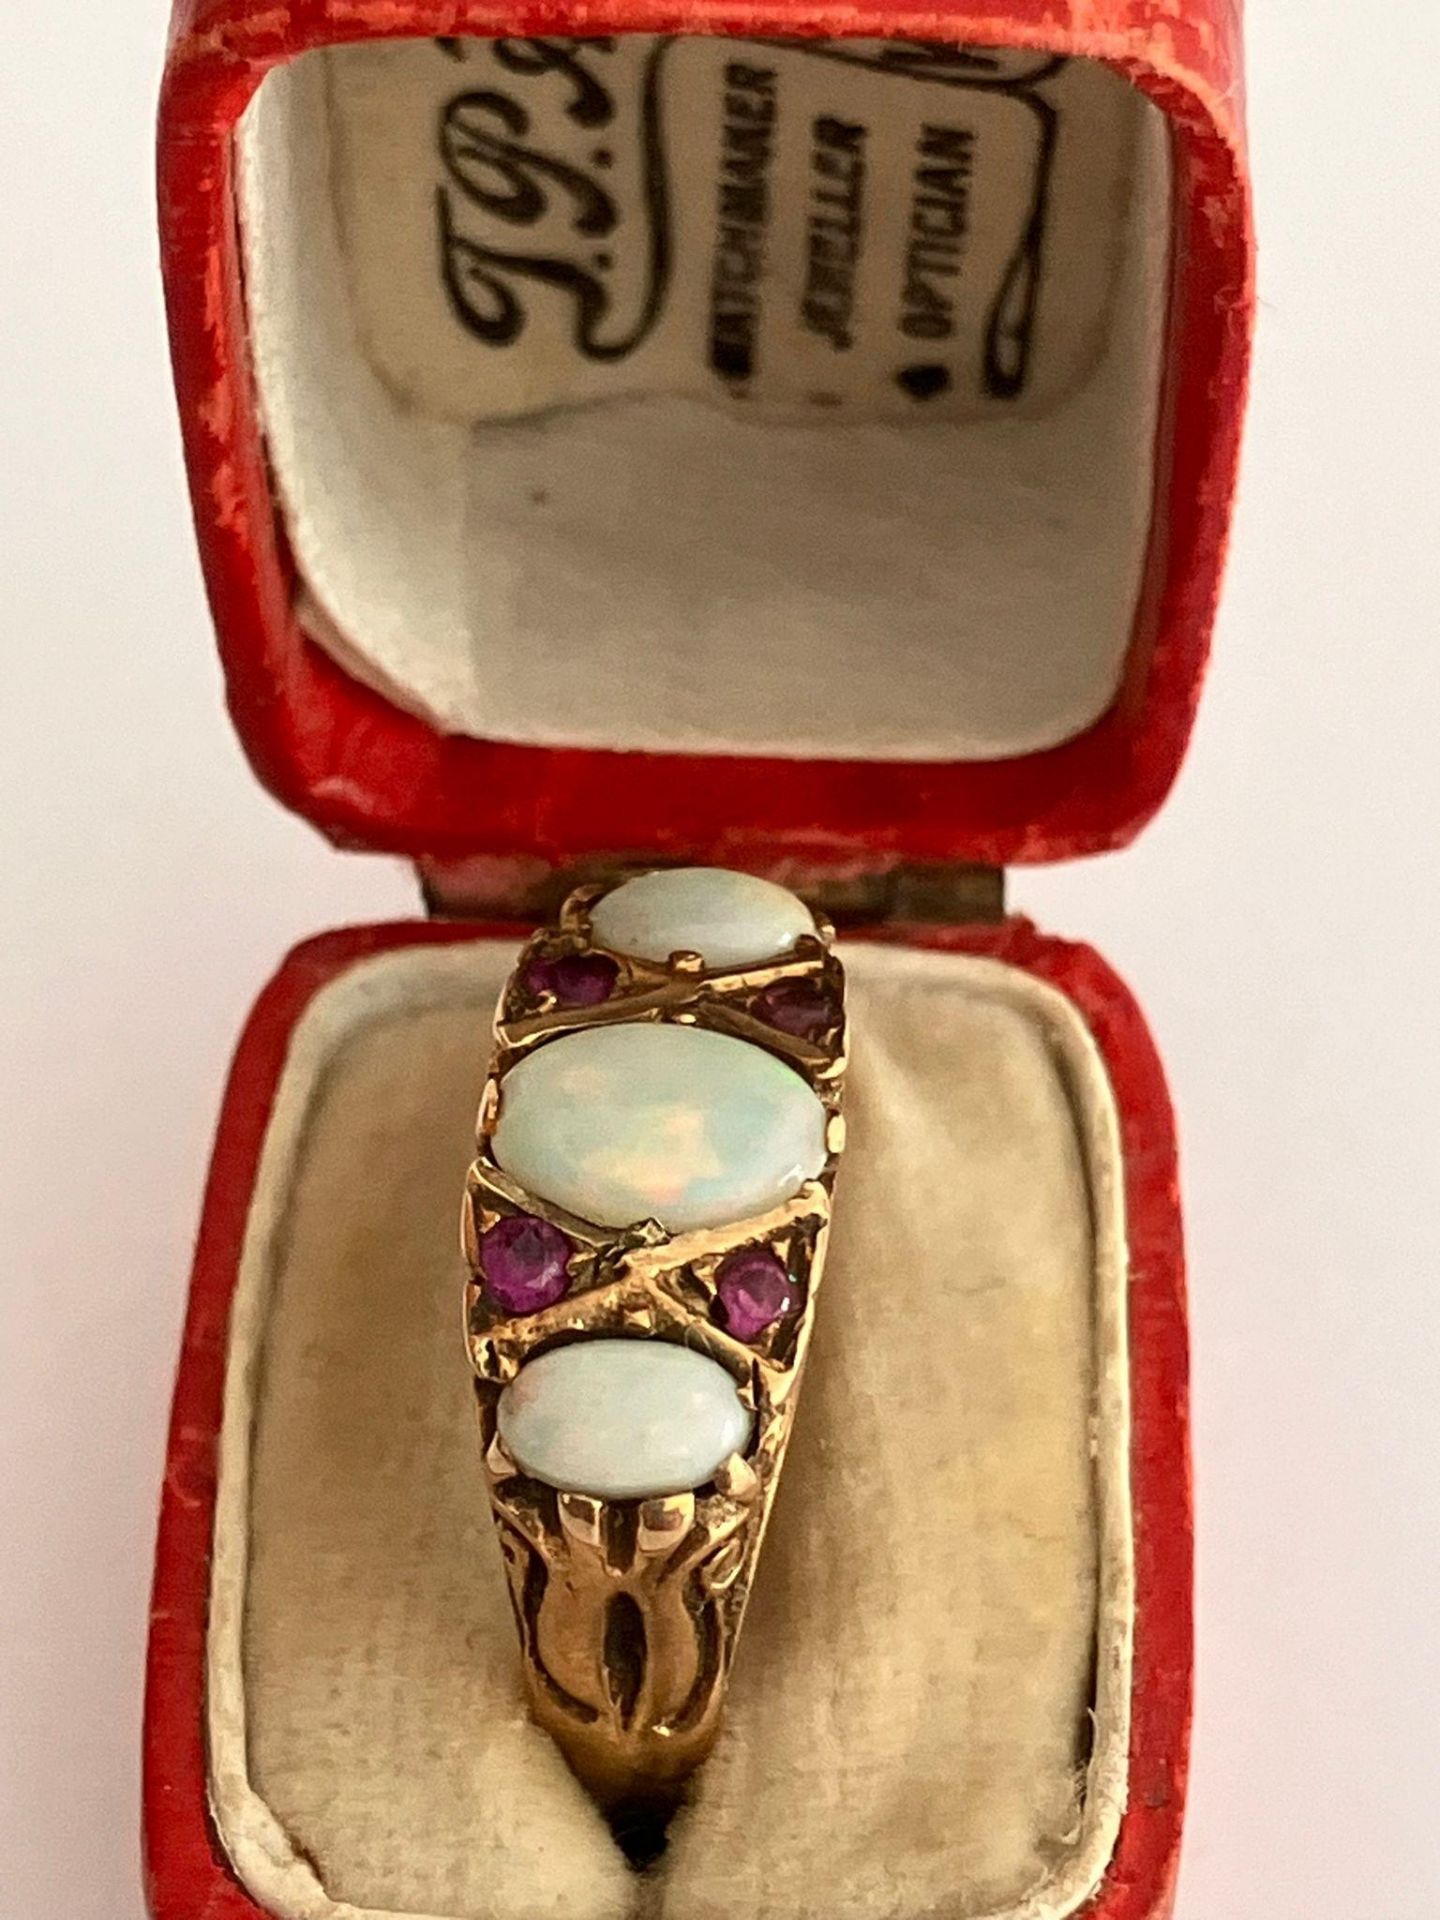 Vintage 9 carat YELLOW GOLD,OPAL and RUBY RING. Full UK hallmark. Complete with jewellers vintage - Bild 2 aus 3